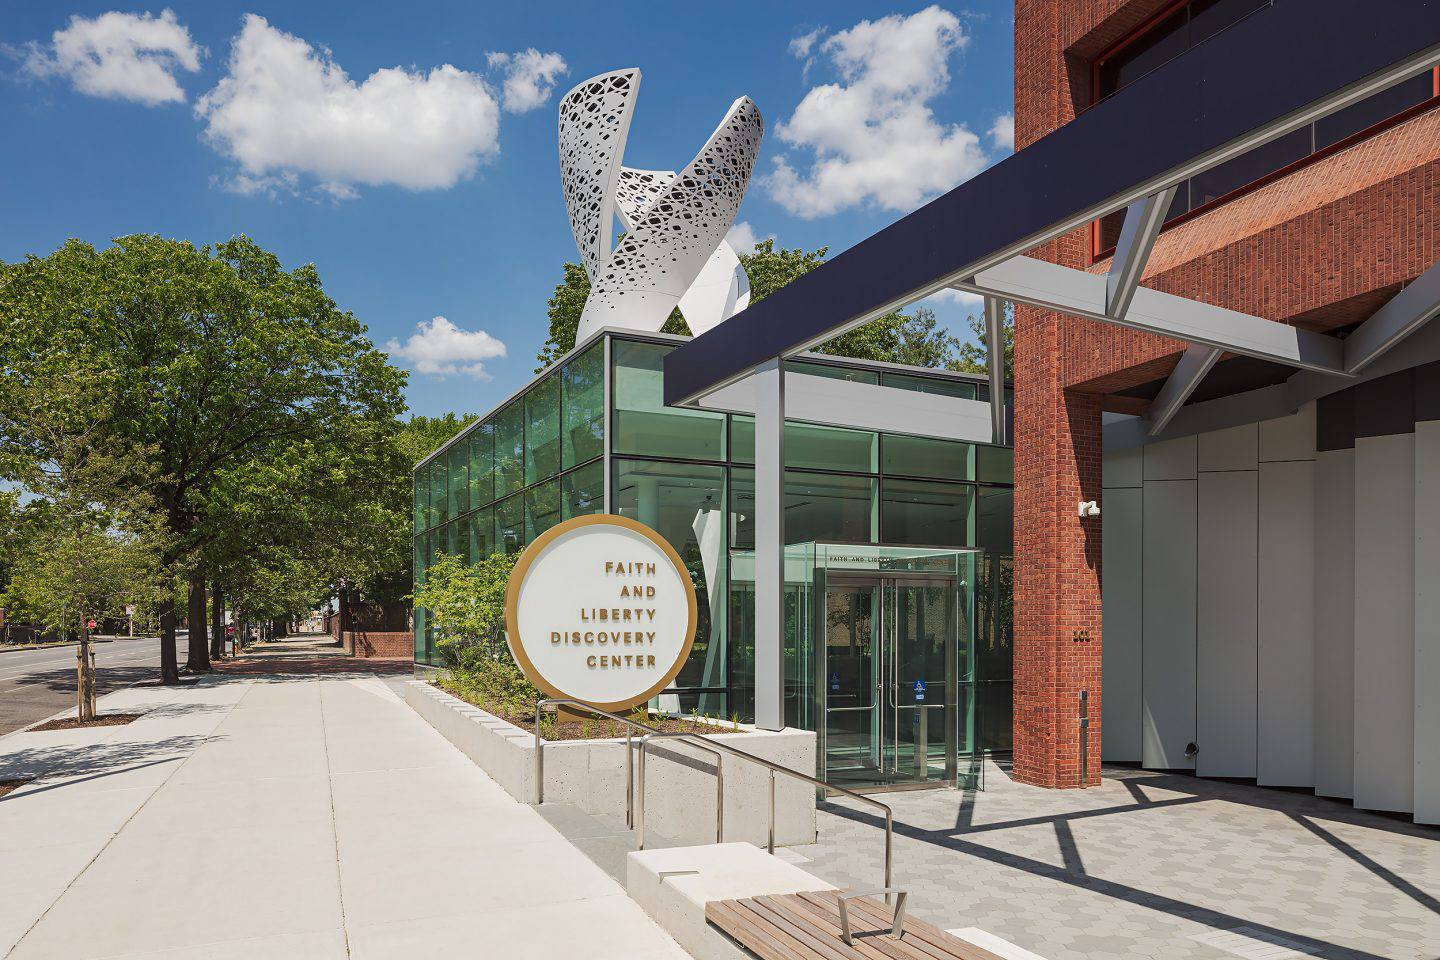 Entrance to the Faith and Liberty Discovery Center in Philadelphia. (Photo courtesy FLDC)